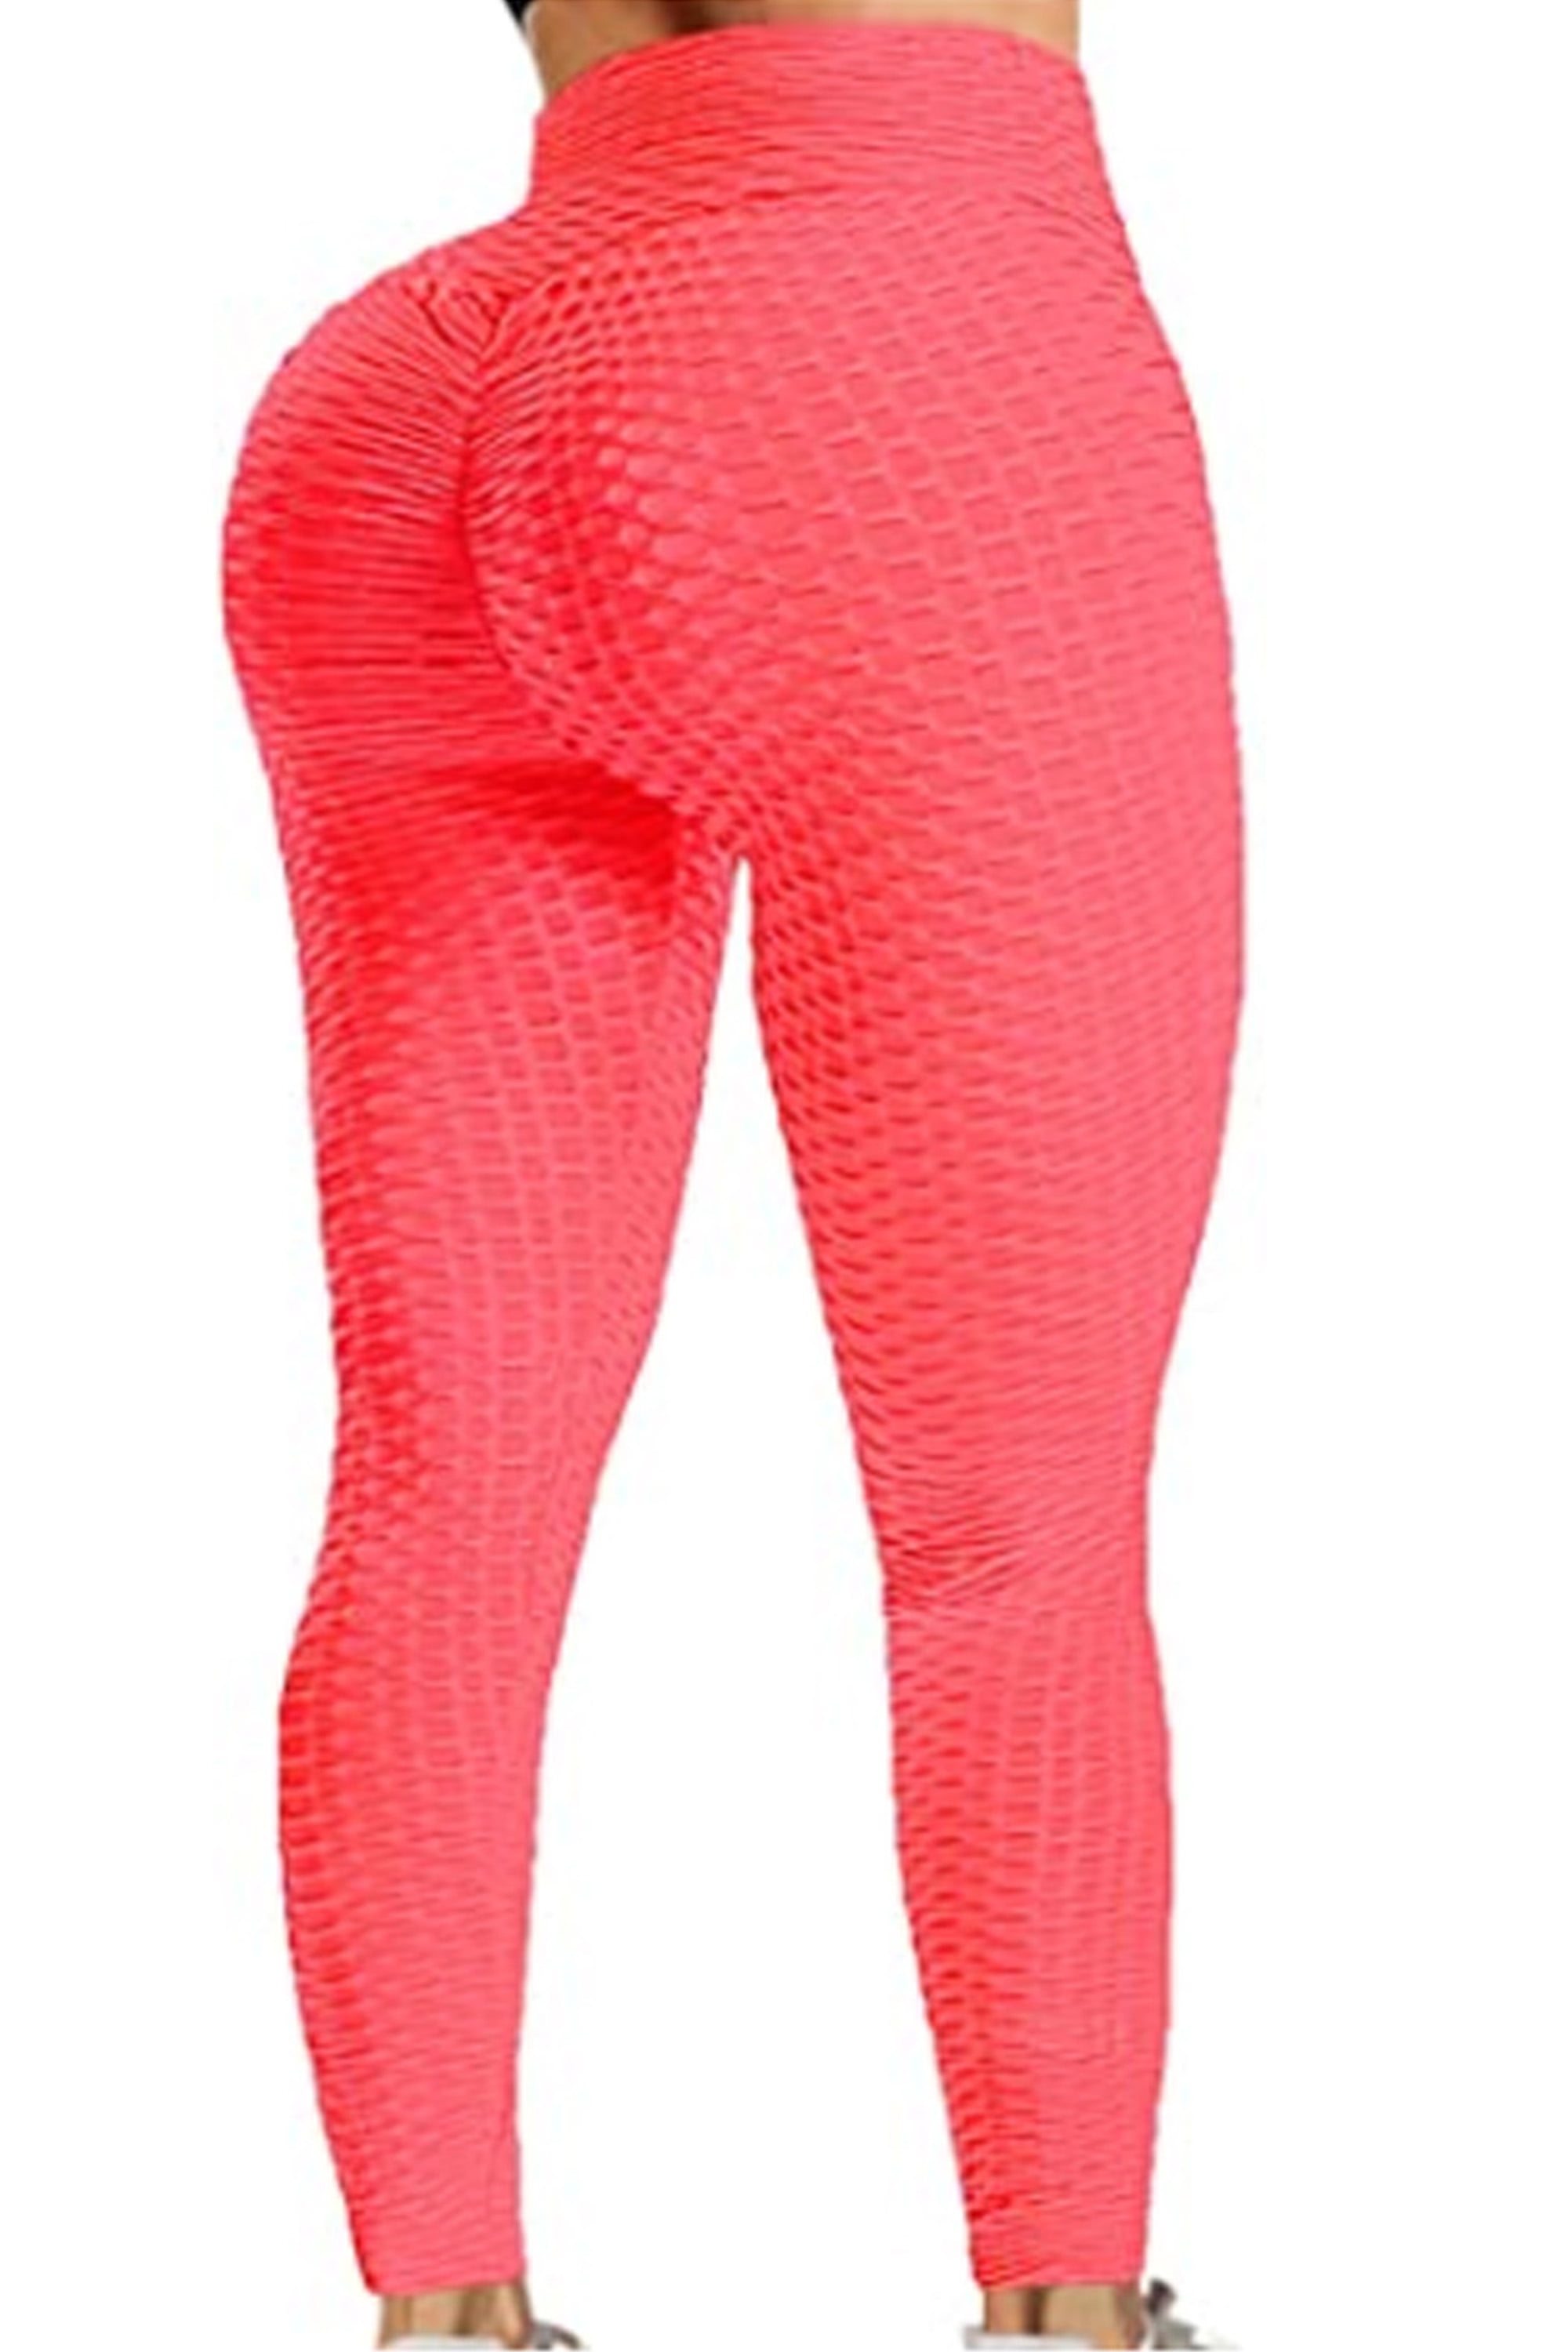 Booty Yoga Pants Women High Waisted Ruched Butt Lift Textured